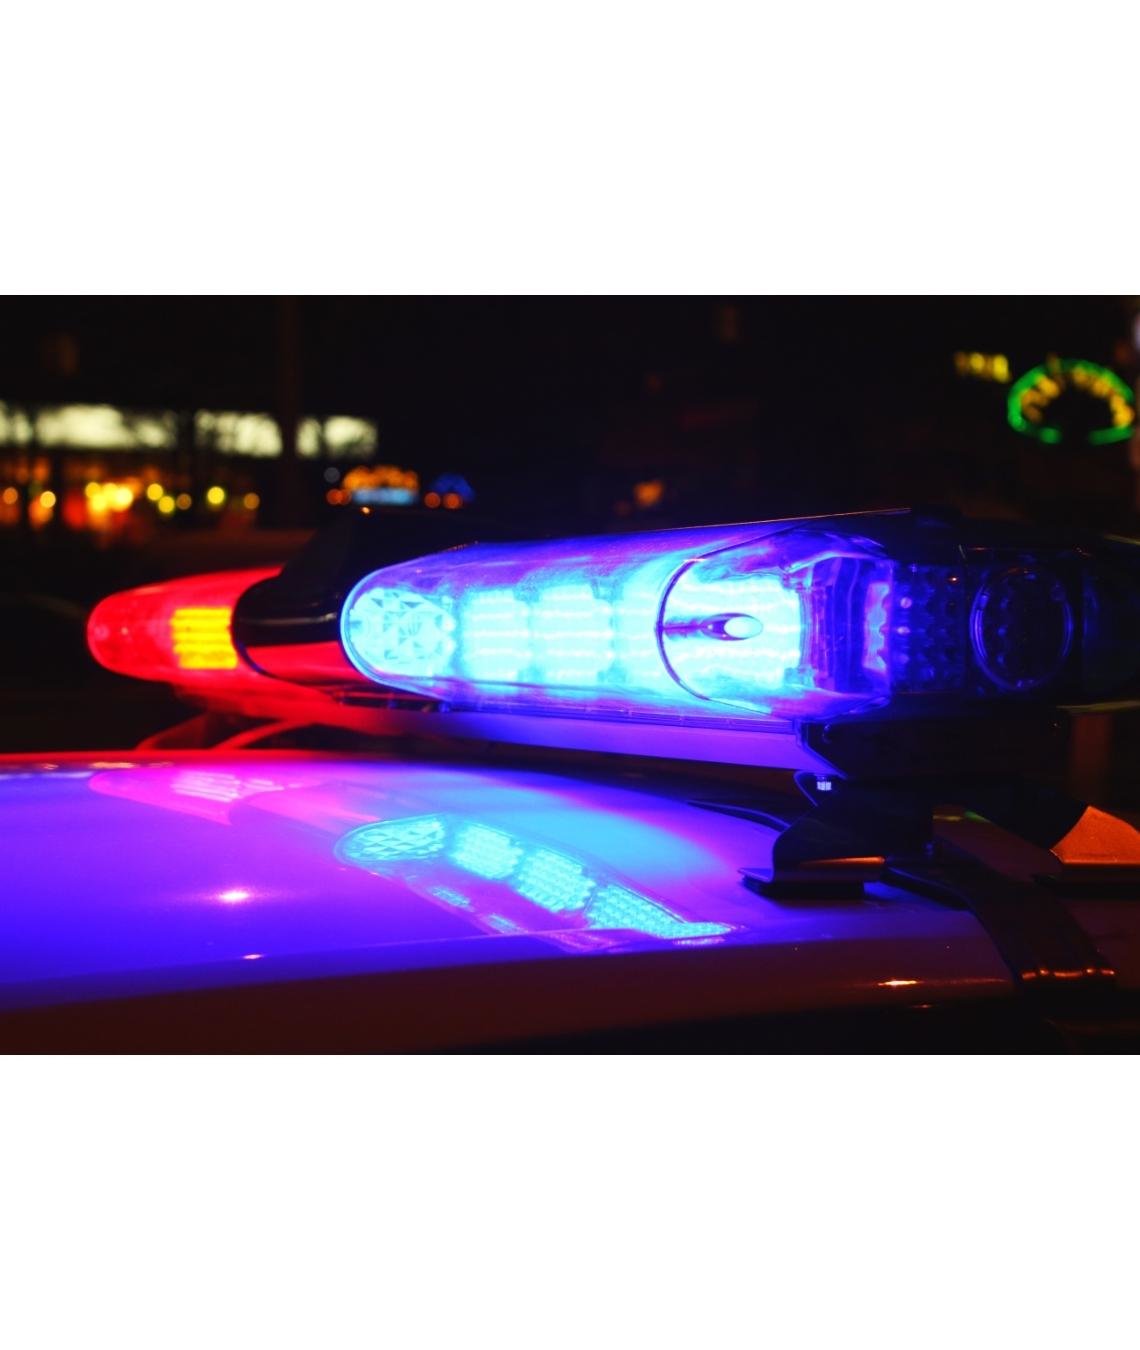 A motorcyclist was killed in a vehicle crash Wednesday night on Pamalee Drive, Fayetteville police said.